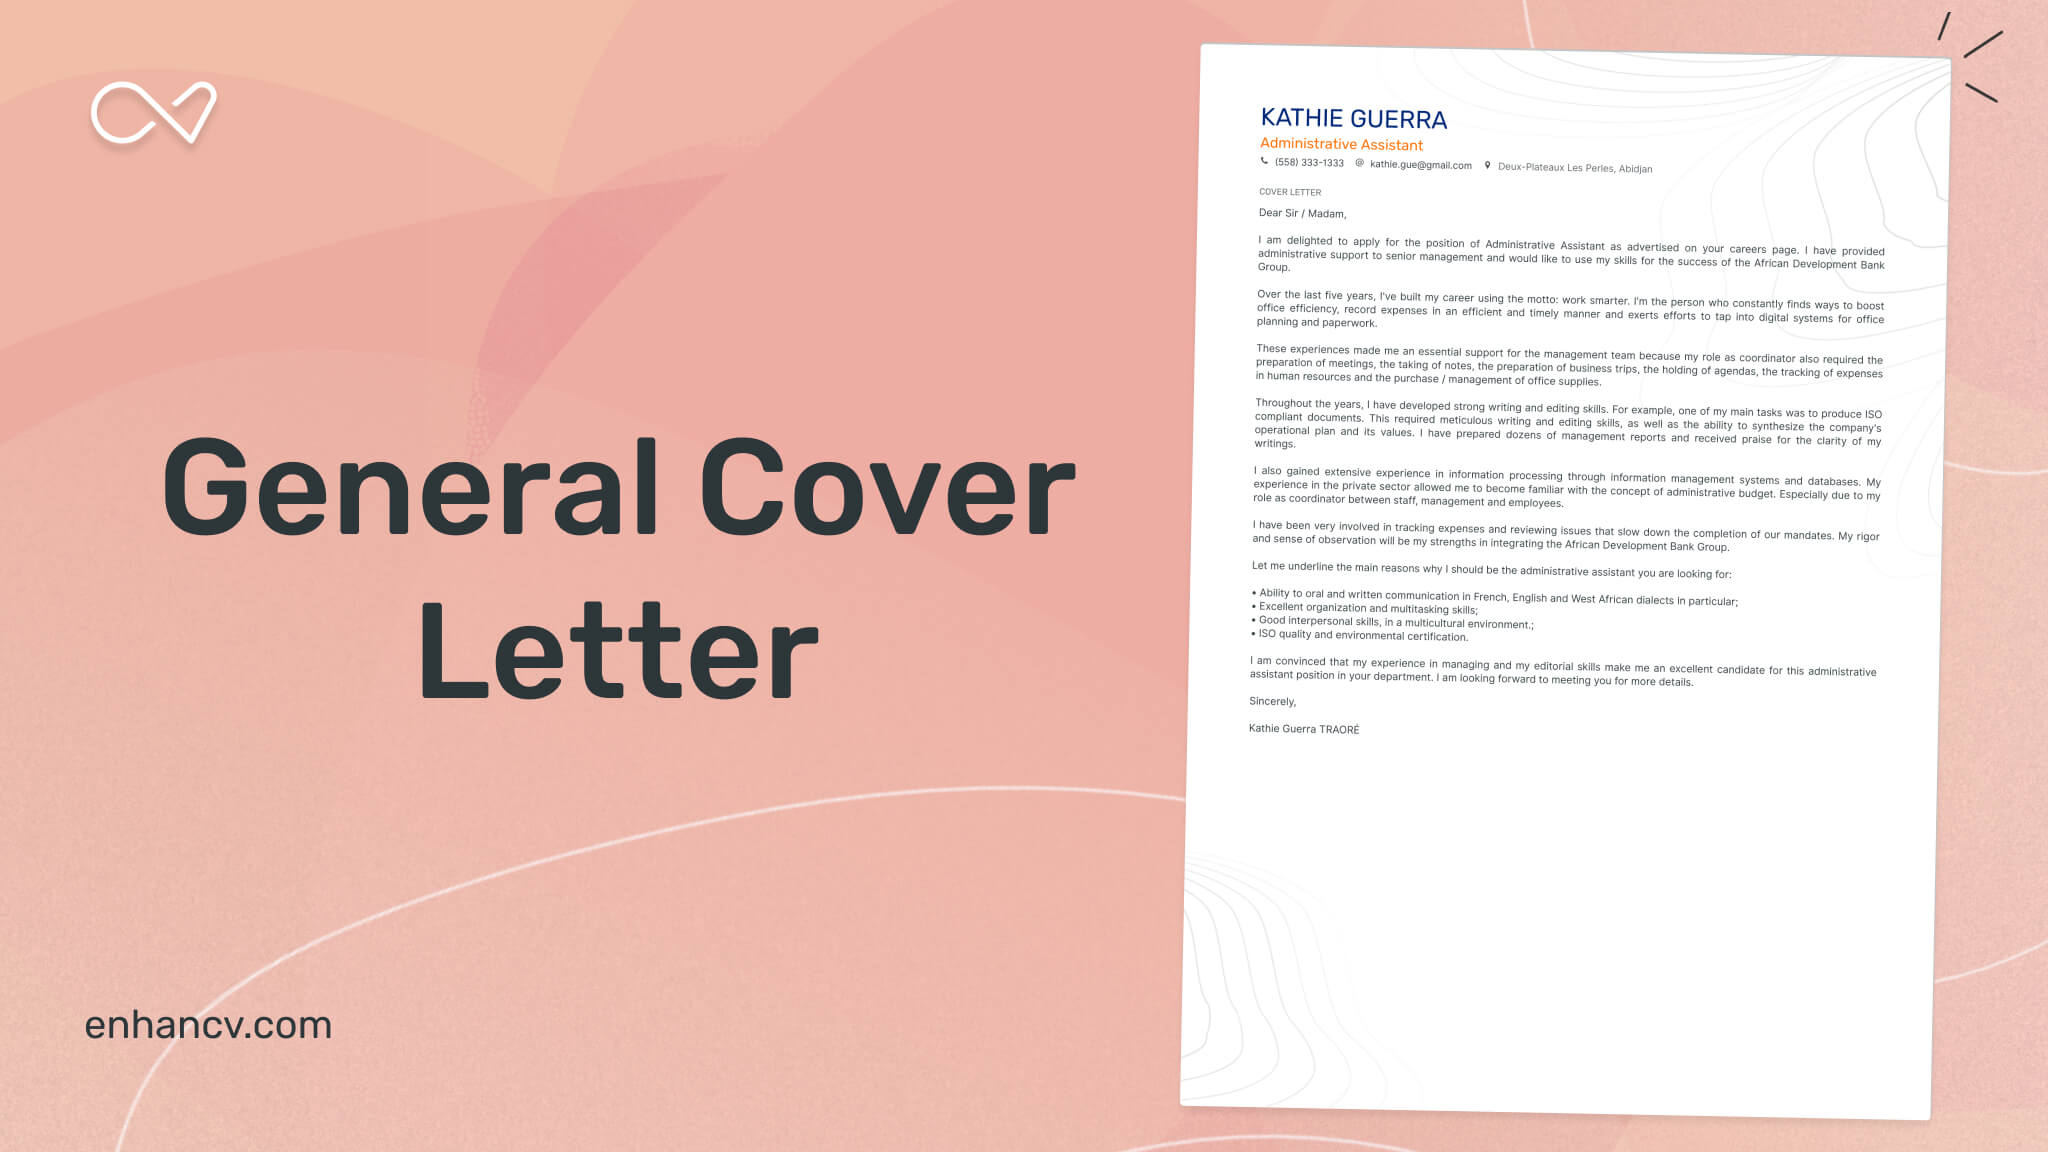 How To End A Cover Letter For A Job Application